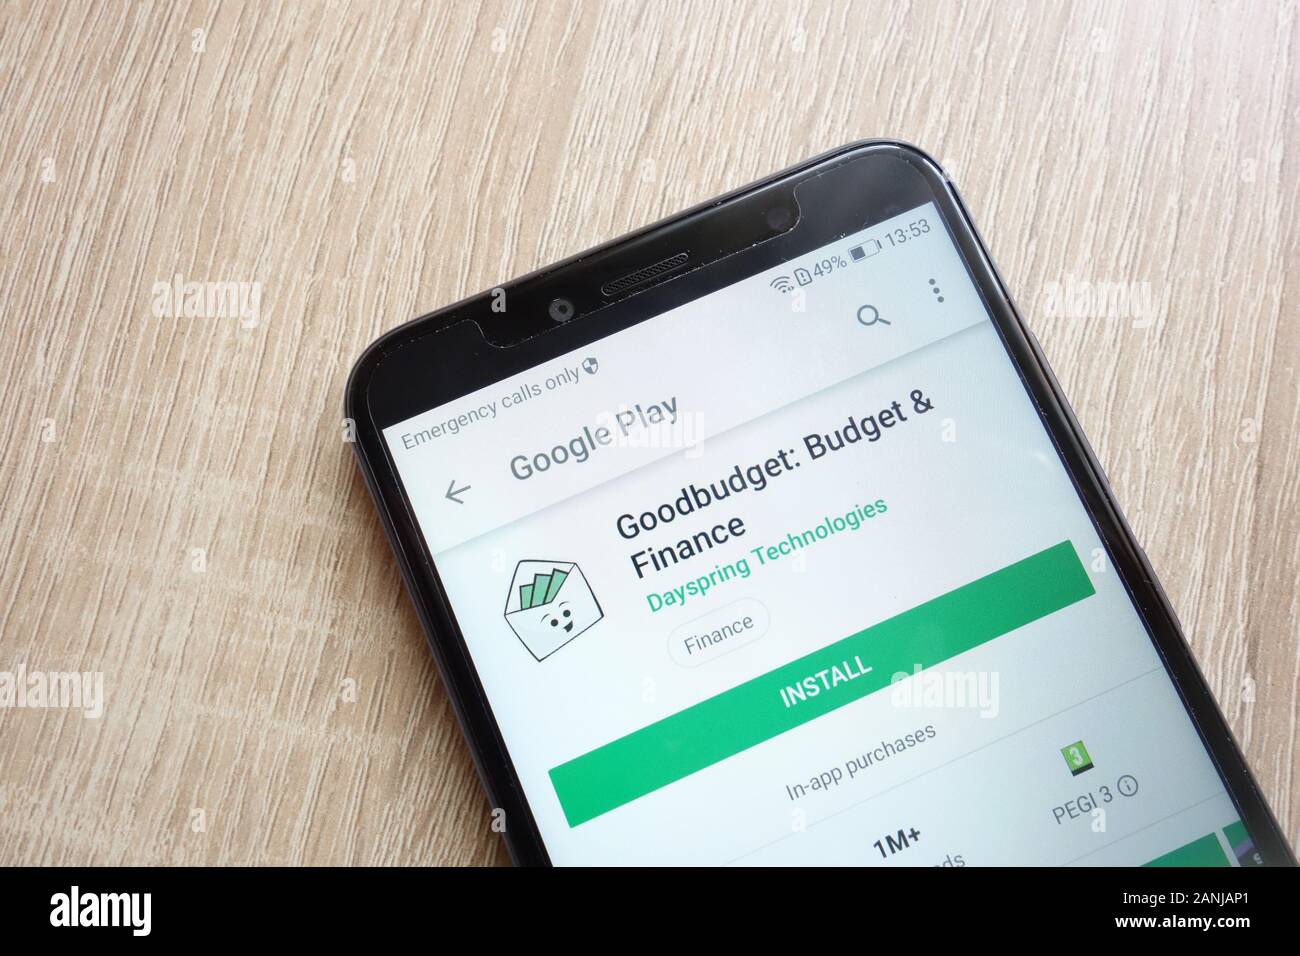 Goodbudget: Budget and Finance app on Google Play Store website displayed on Huawei Y6 2018 smartphone Stock Photo